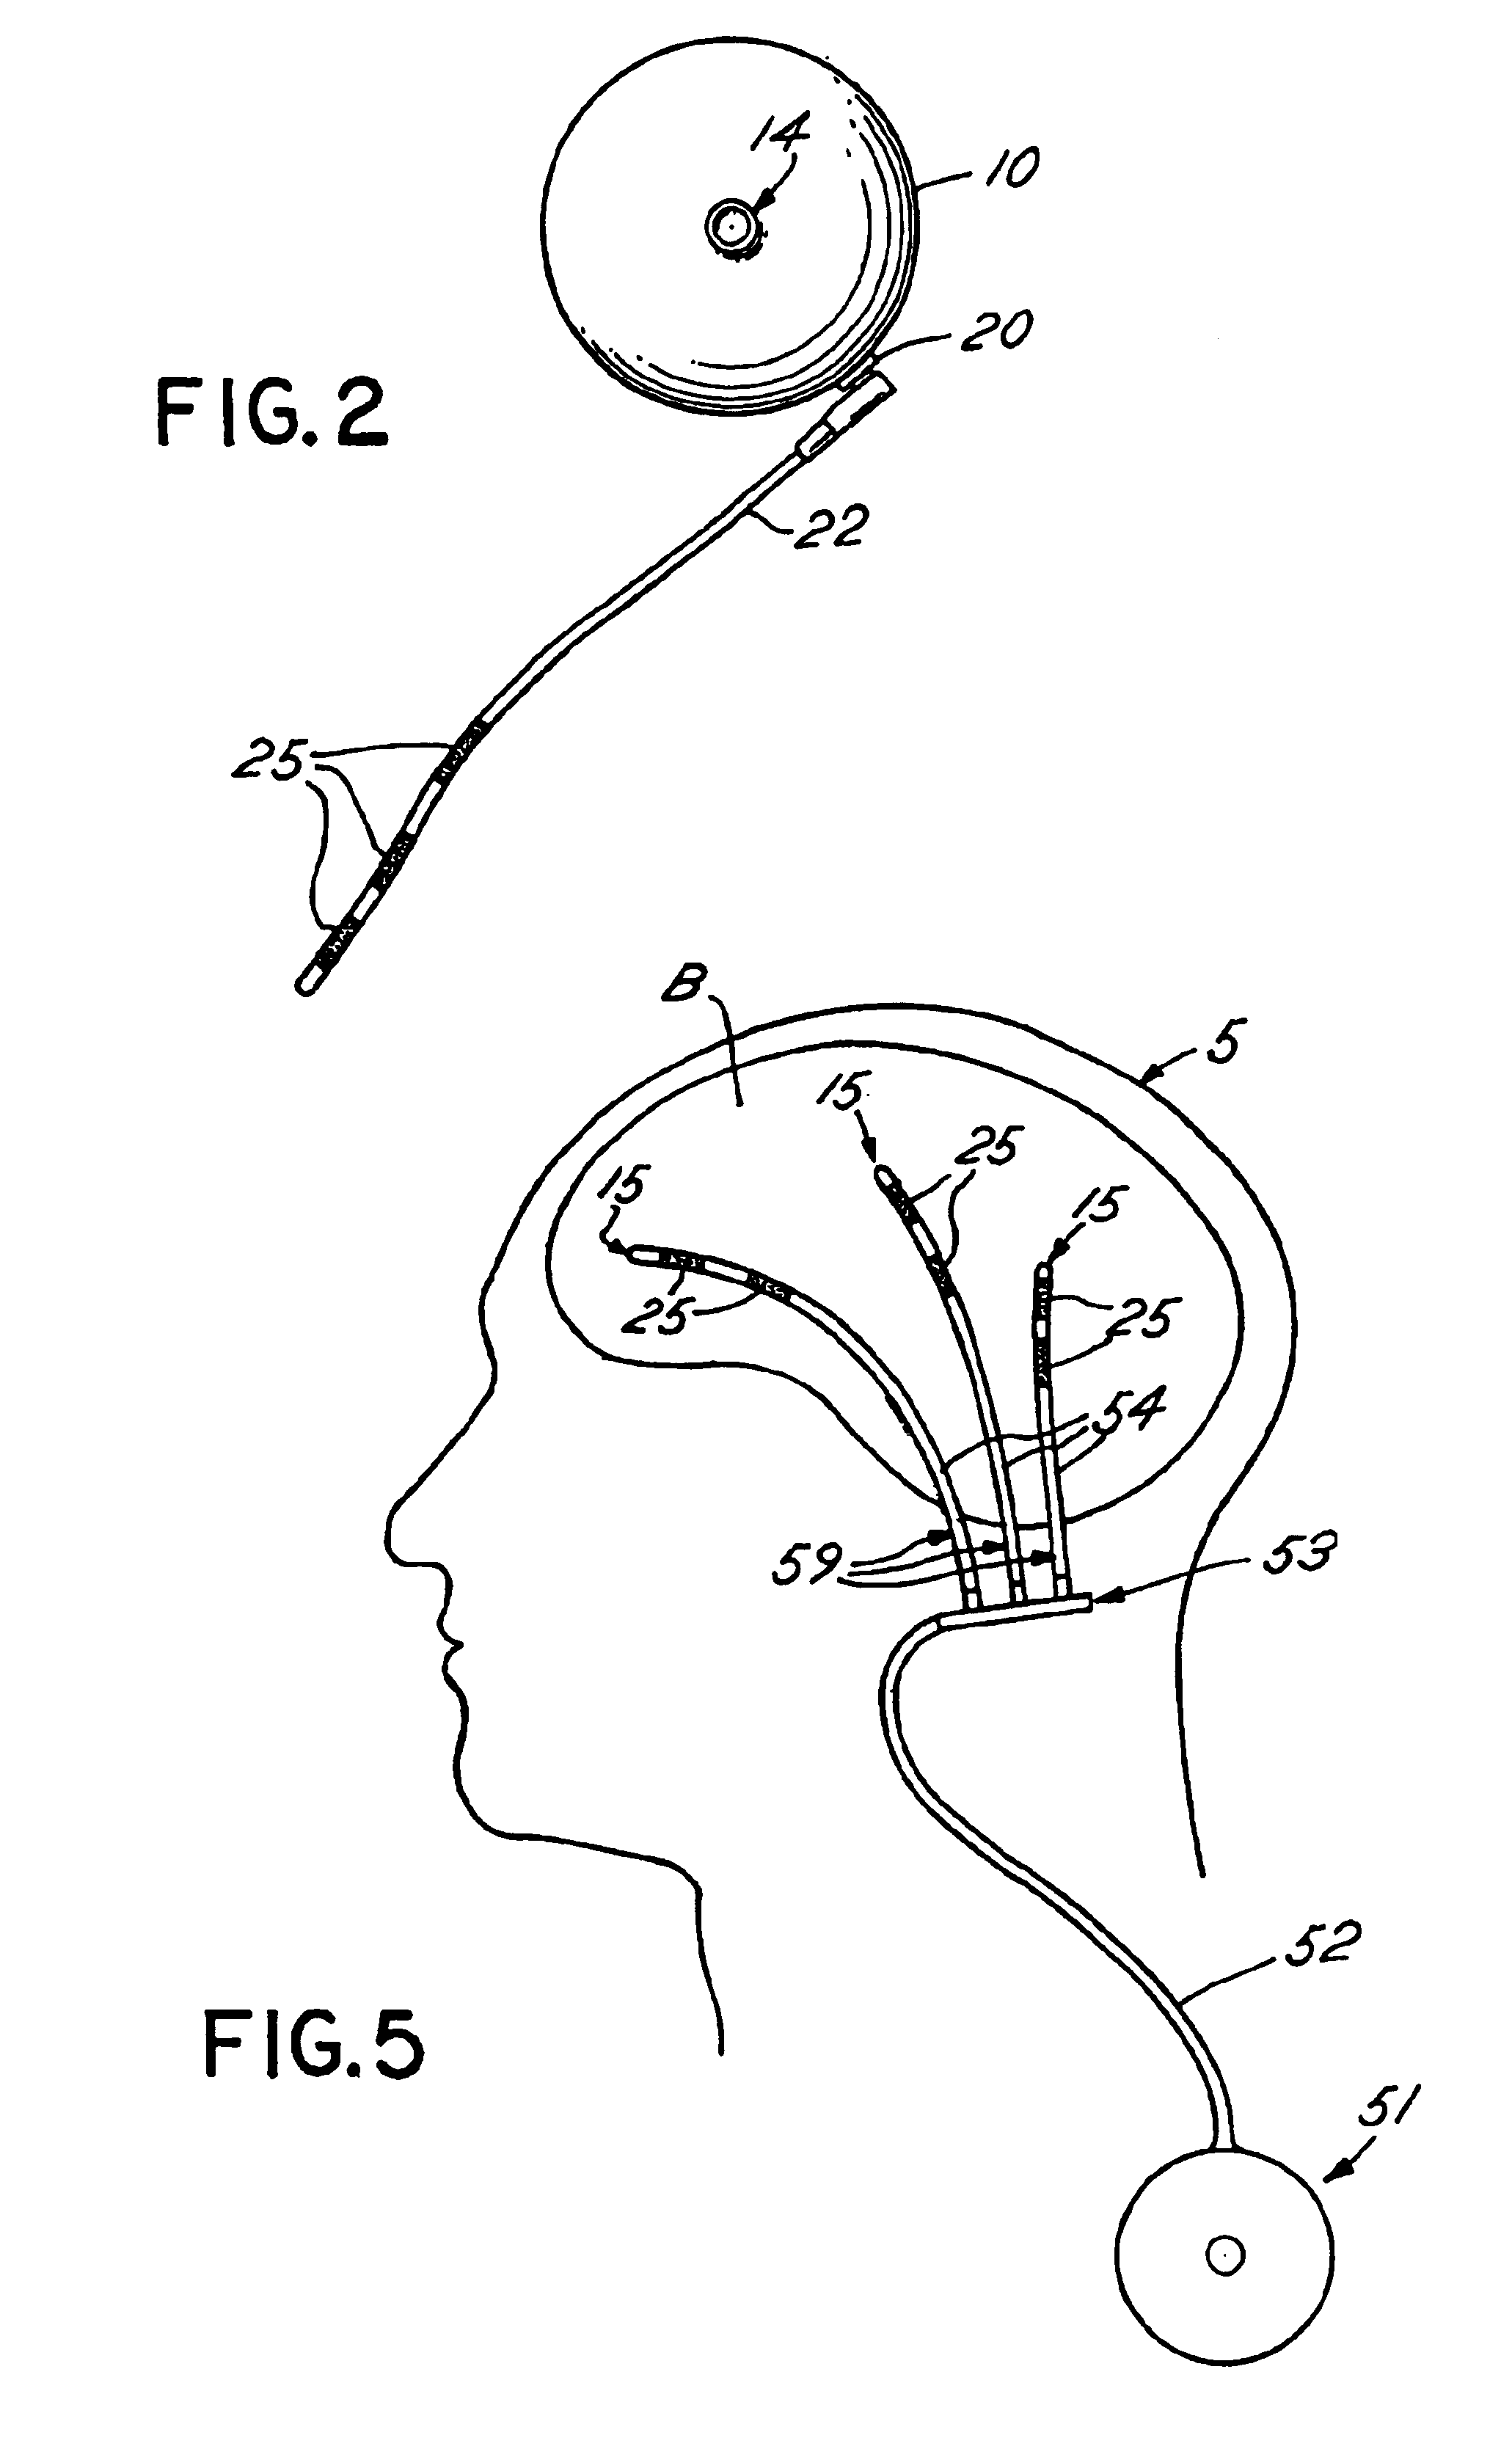 Method for convection enhanced delivery catheter to treat brain and other tumors